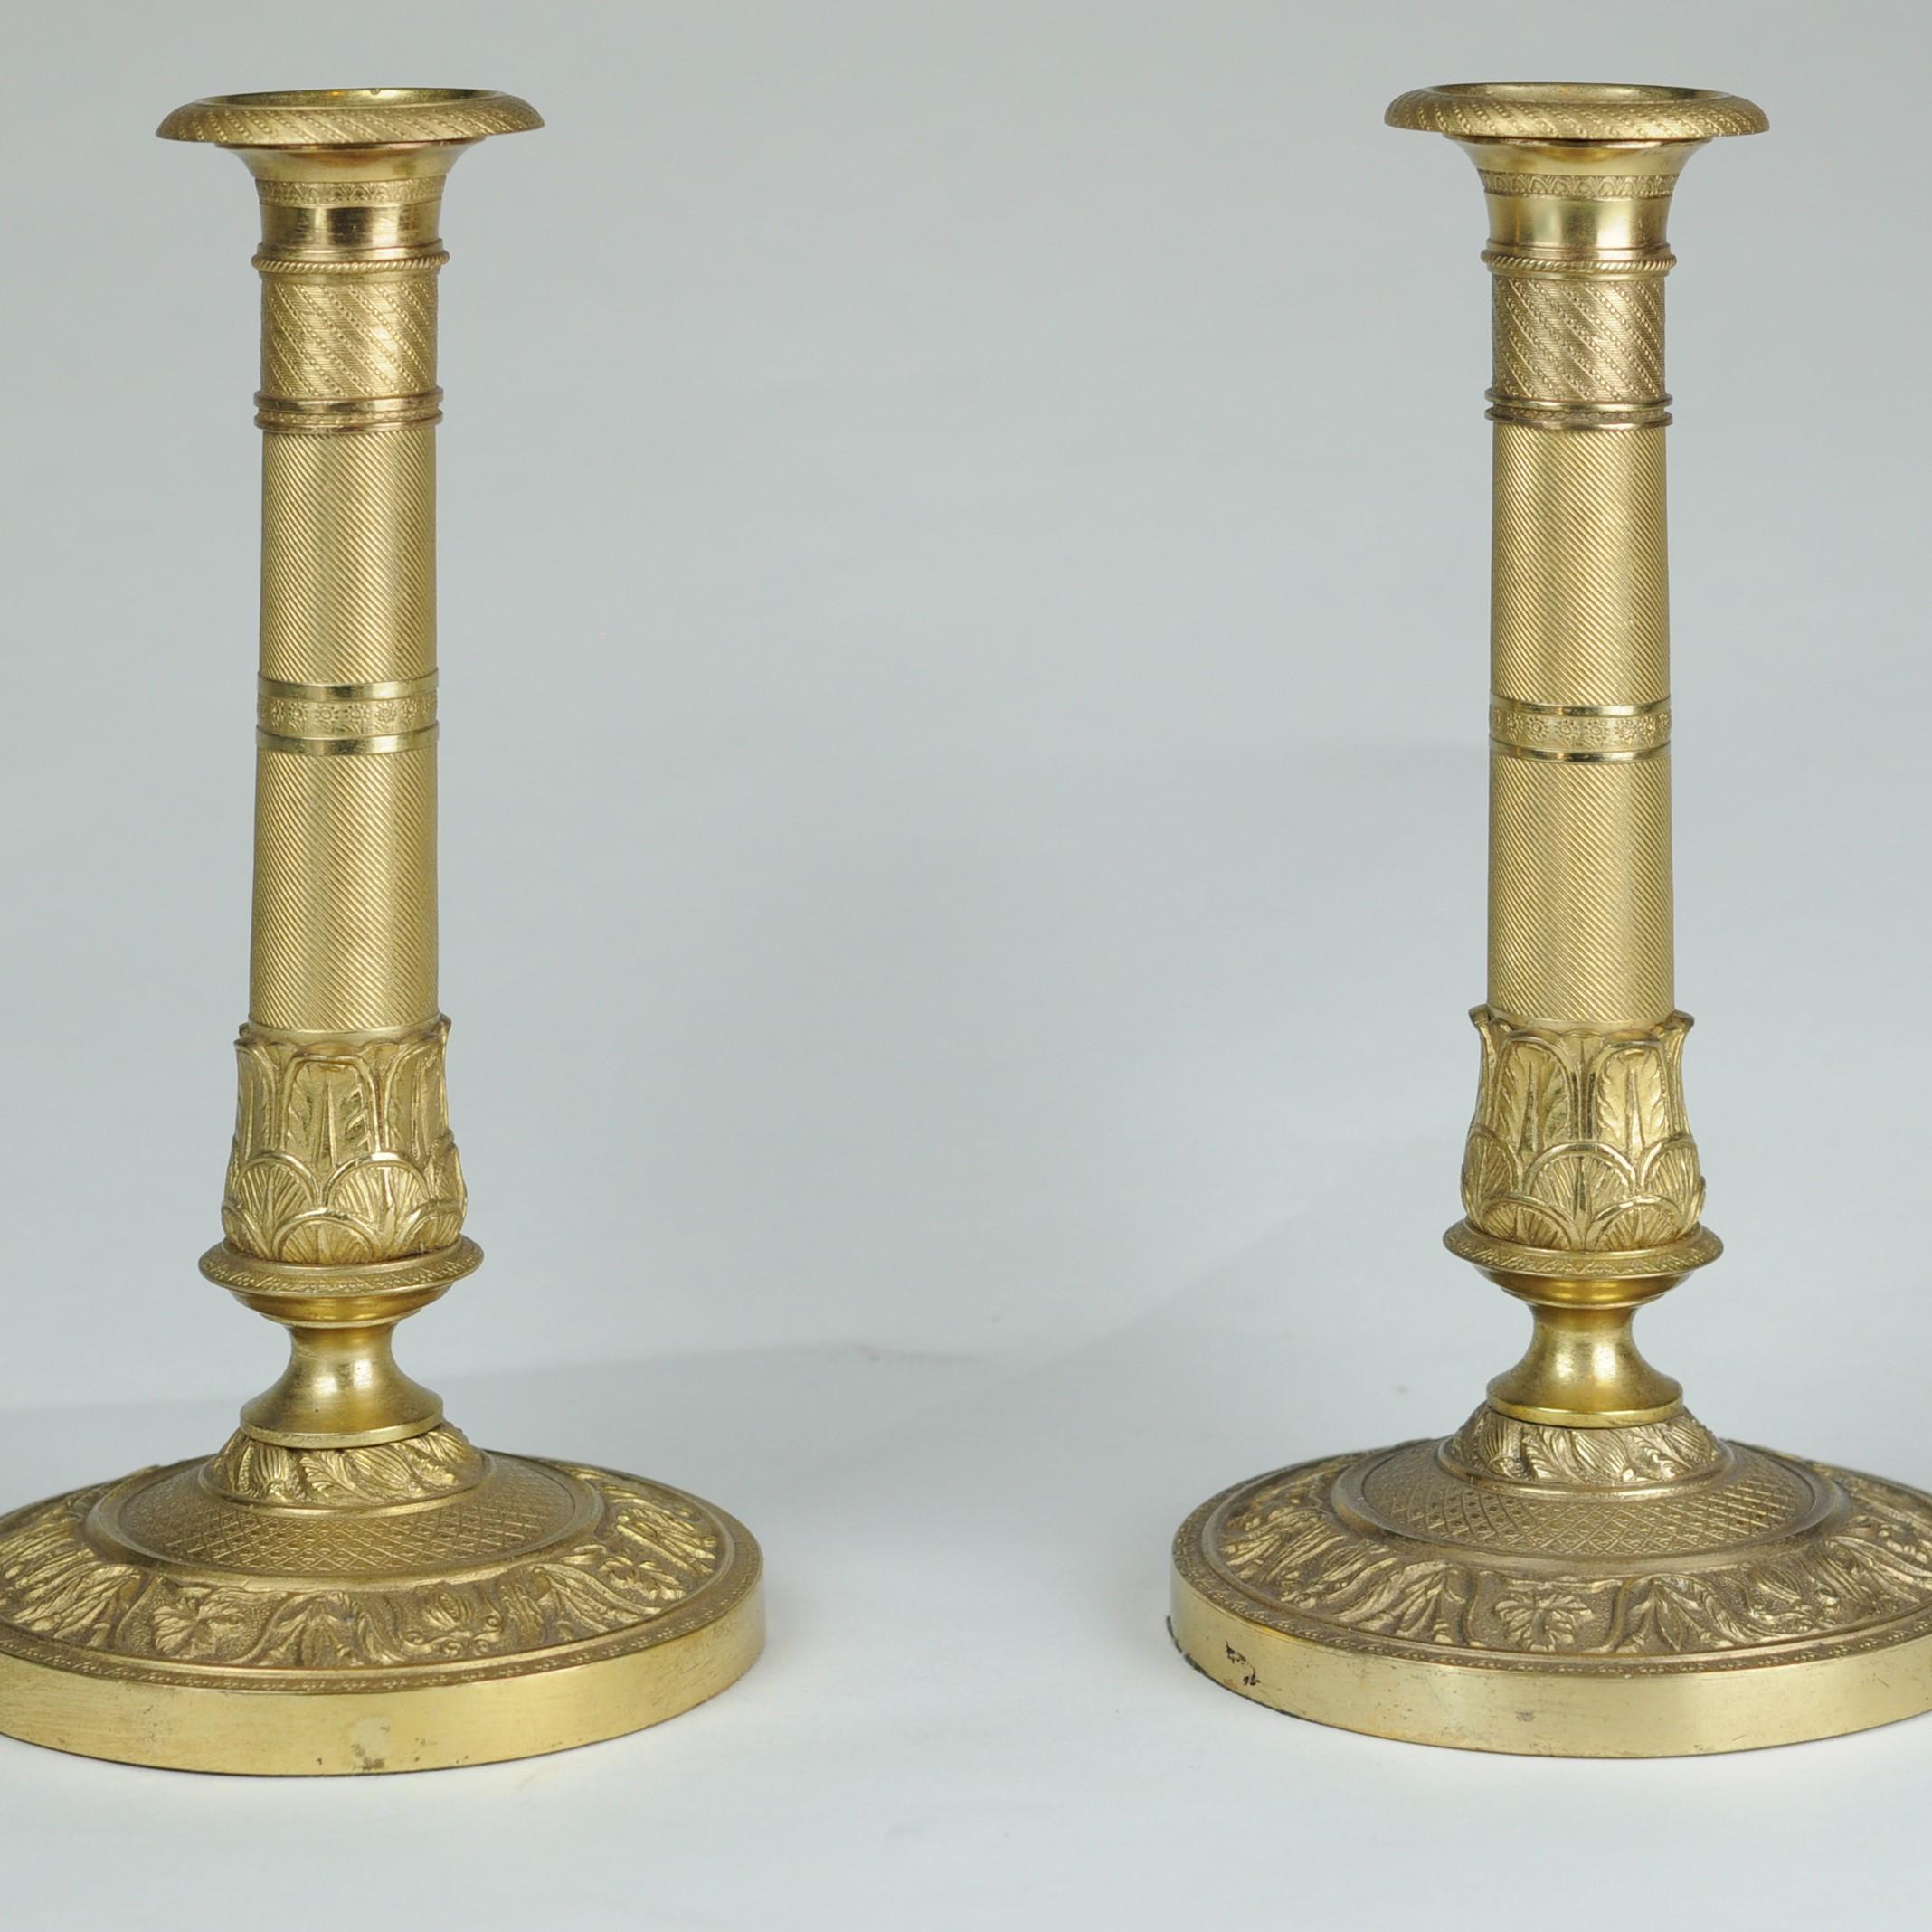 A fine pair of early 19th century ormolu candlesticks decorated with crisp, engine-turning throughout and retaining the original sconces. Unusually with weighted bases, possibly indicating English manufacture.